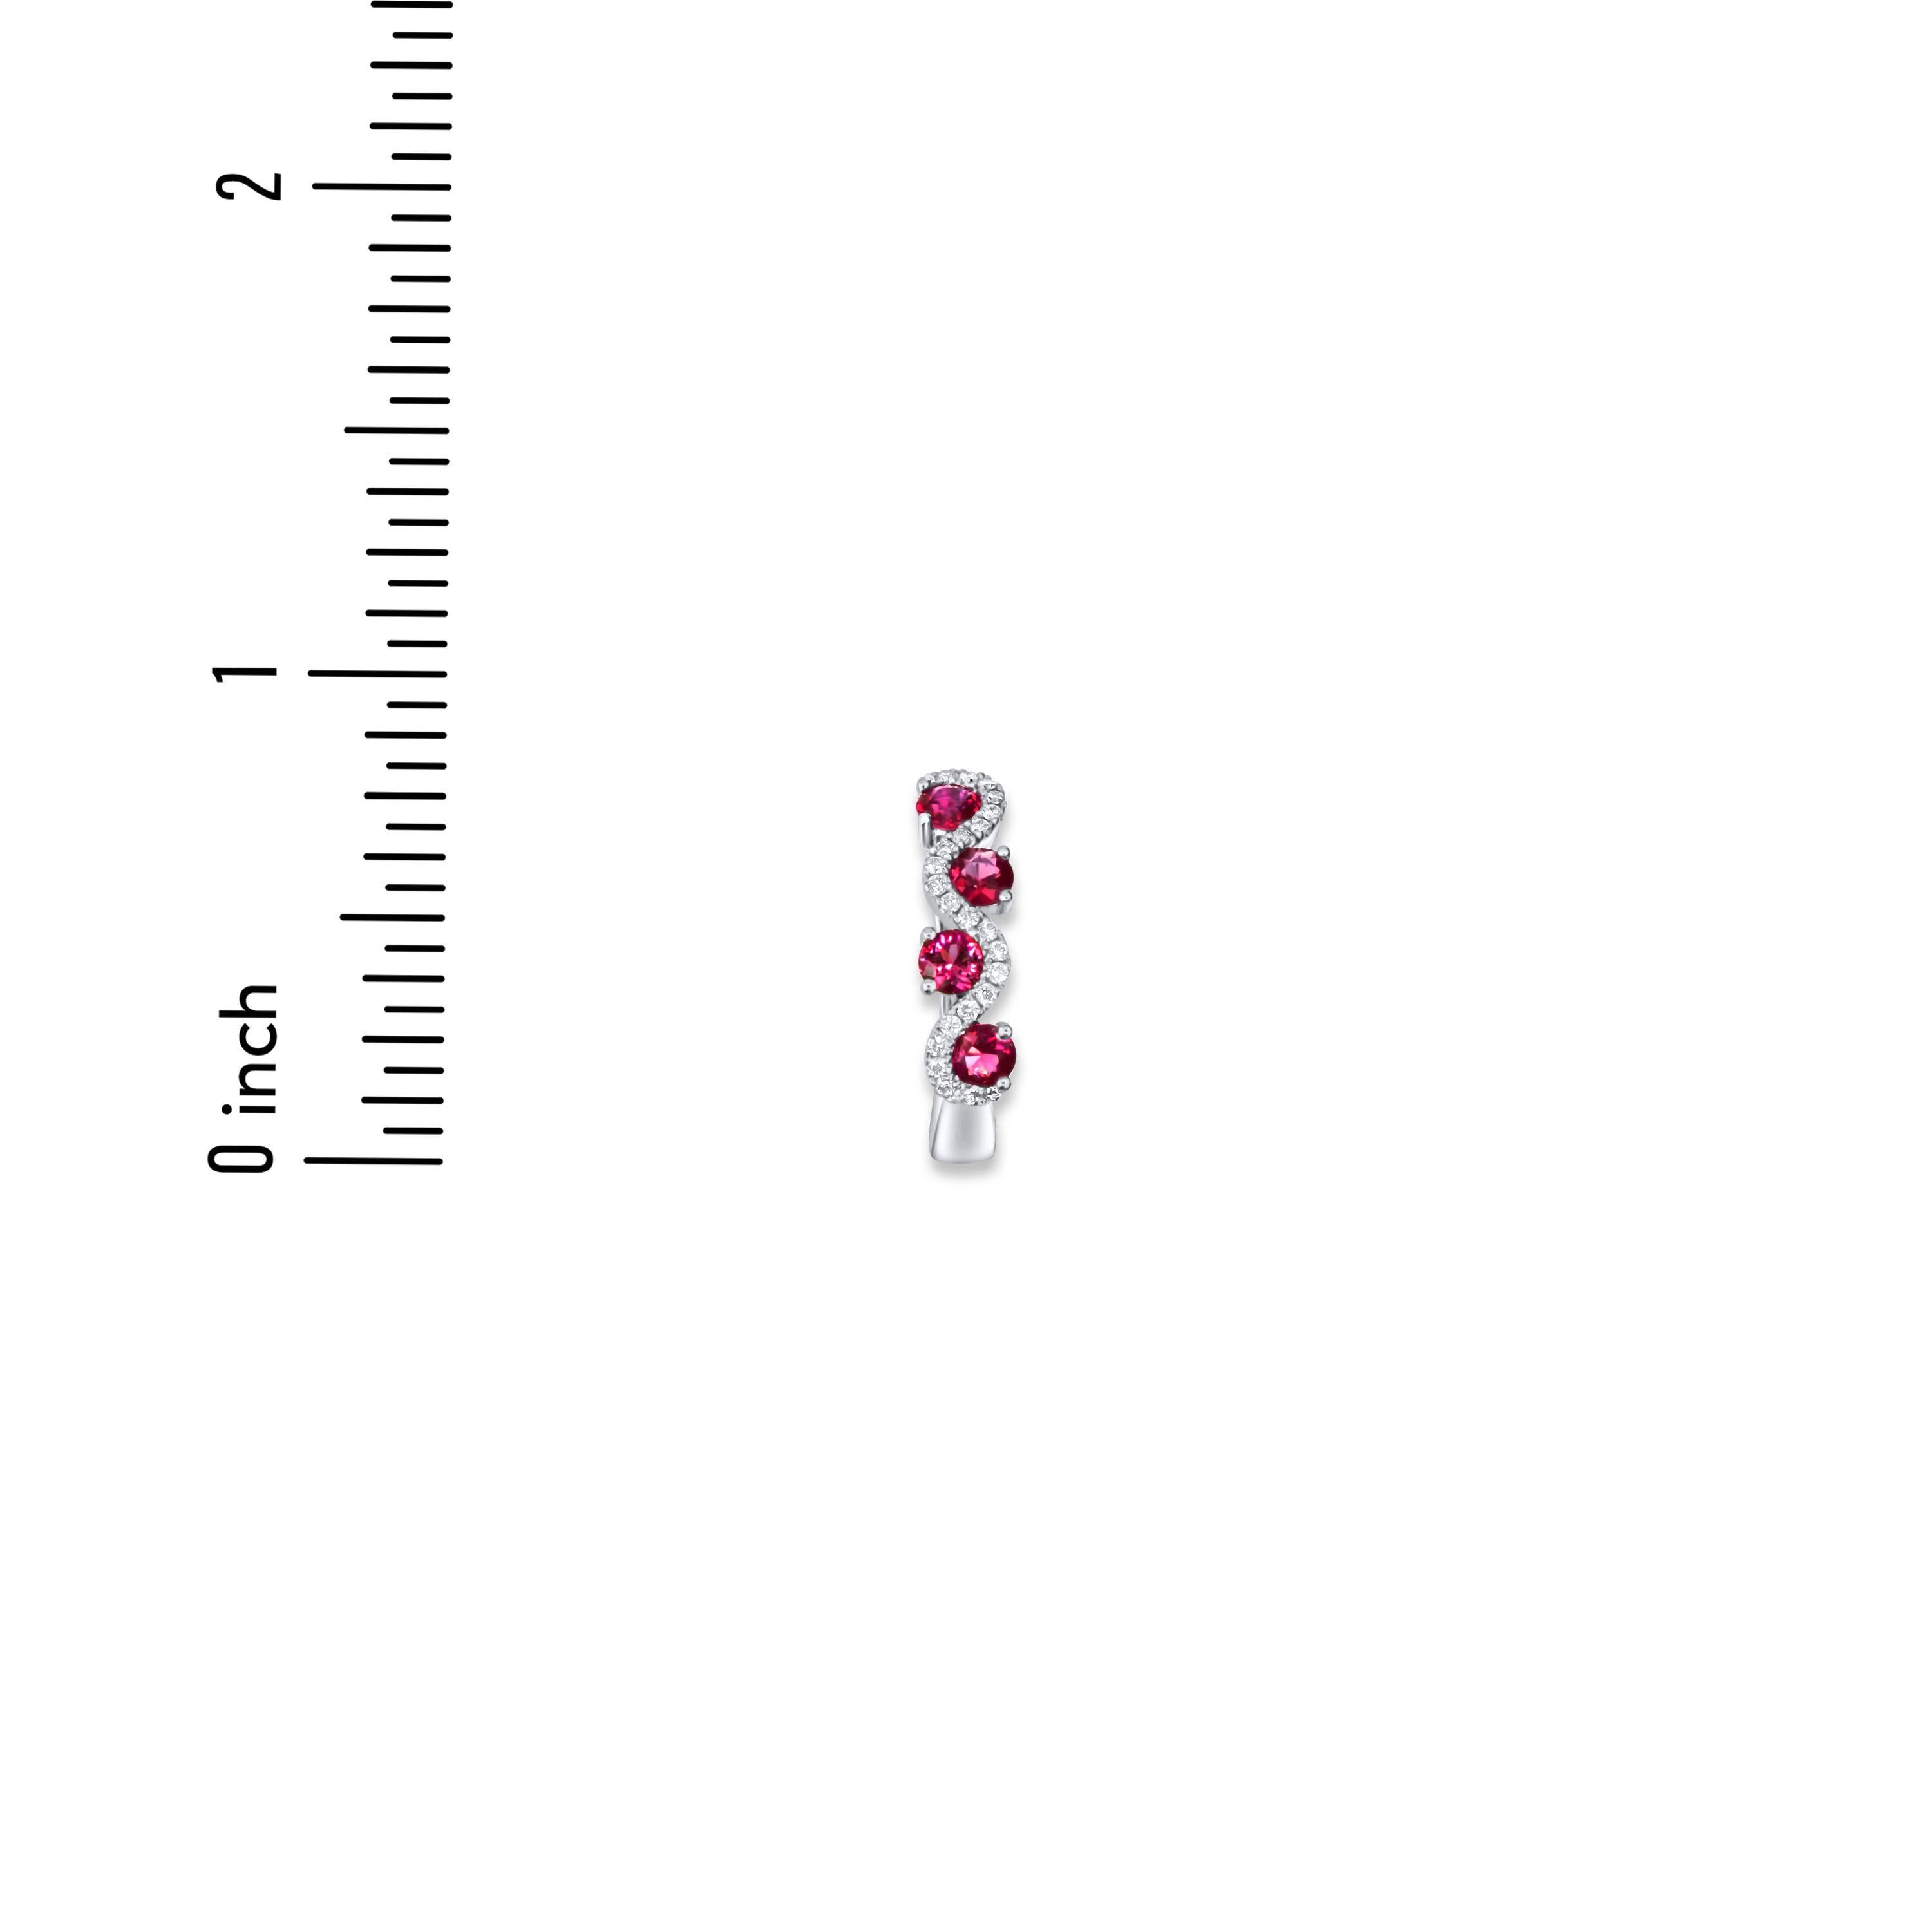 Round Cut 1.45 Carat Ruby and Diamond Hoop Earrings in 14k White Gold ref1922 For Sale